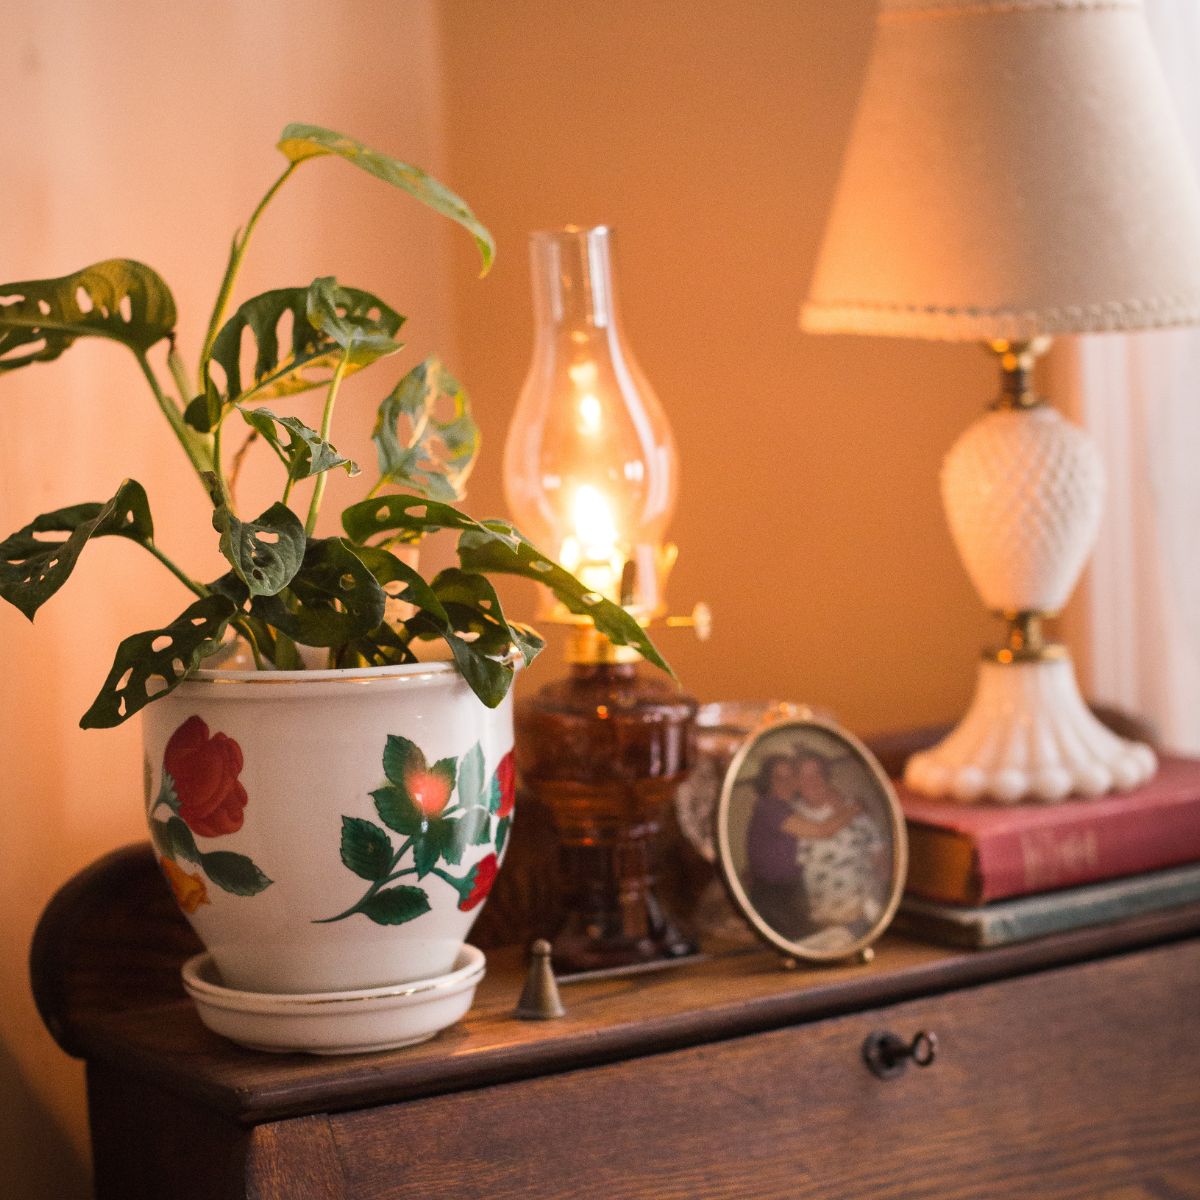 A secretary desk in the corner of a room with home decor such as a monstera plant, lit oil lamp with a amber base, a photo of Dusty with her beloved grandmother & a milkglass lamp sitting on two old books.